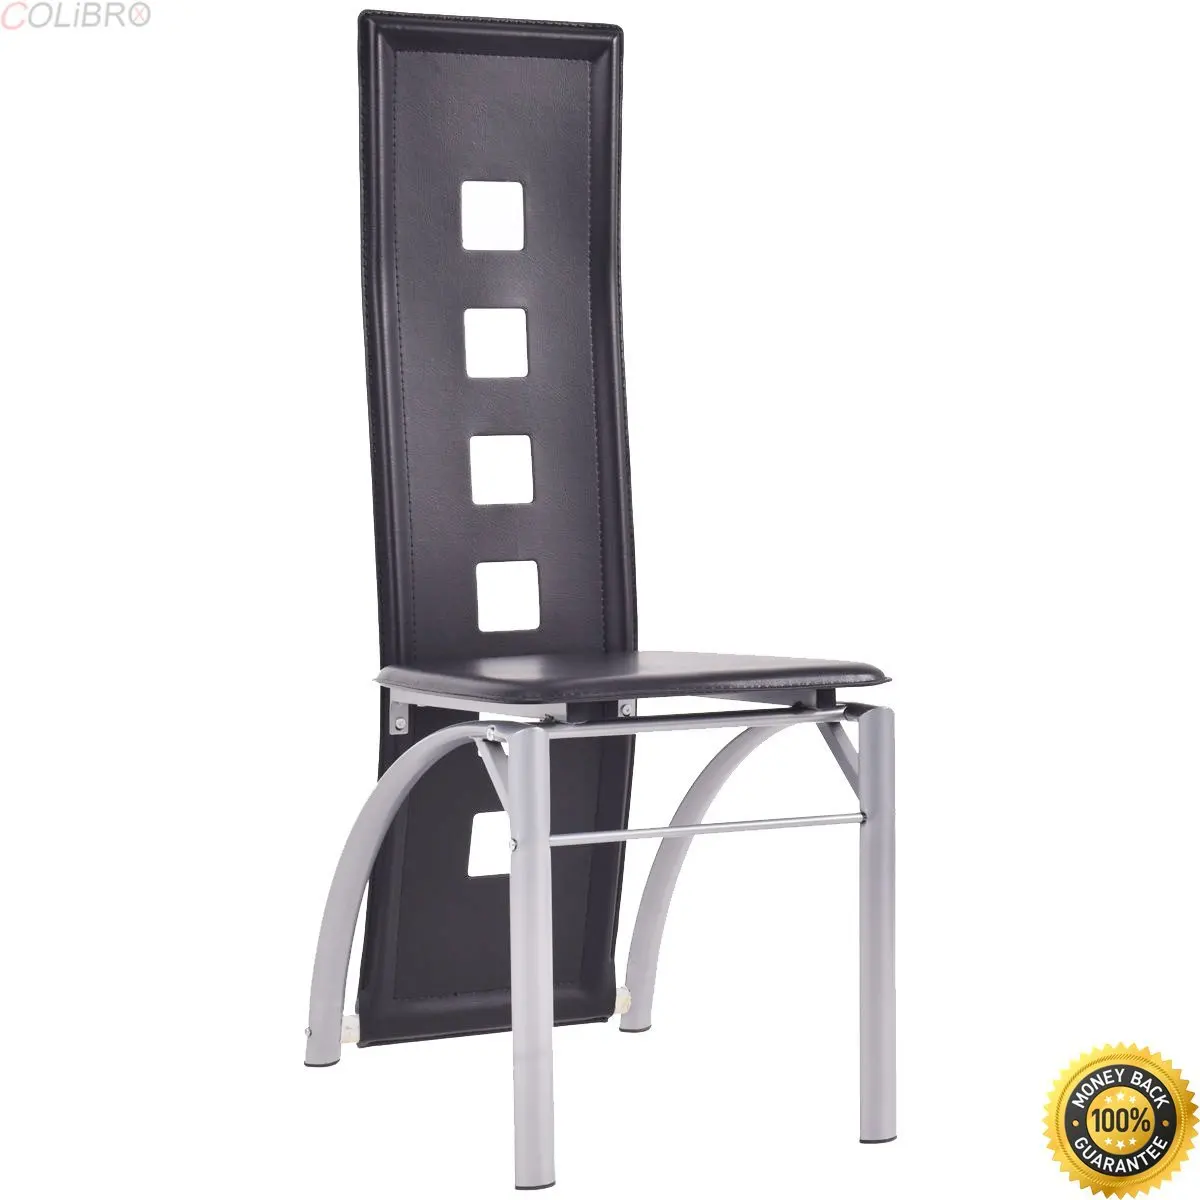 Buy COLIBROX Set Of 4 Dining Chairs PU Leather Steel Frame High